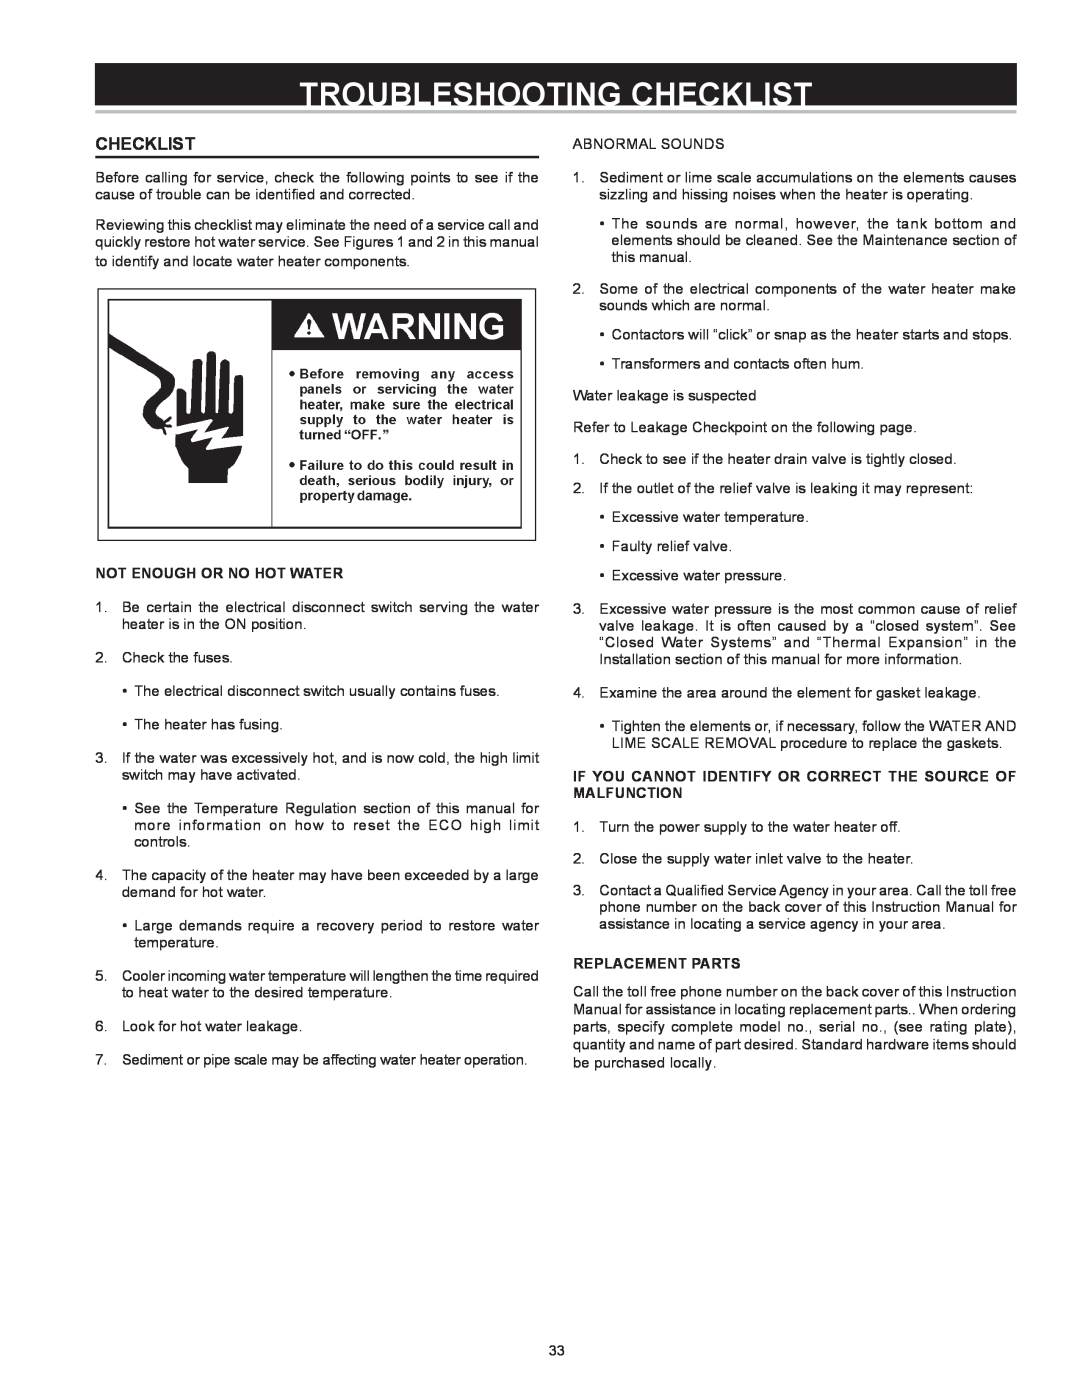 A.O. Smith Dve-52/80/120 instruction manual Troubleshooting Checklist, Not enough or no hot water, Replacement Parts 